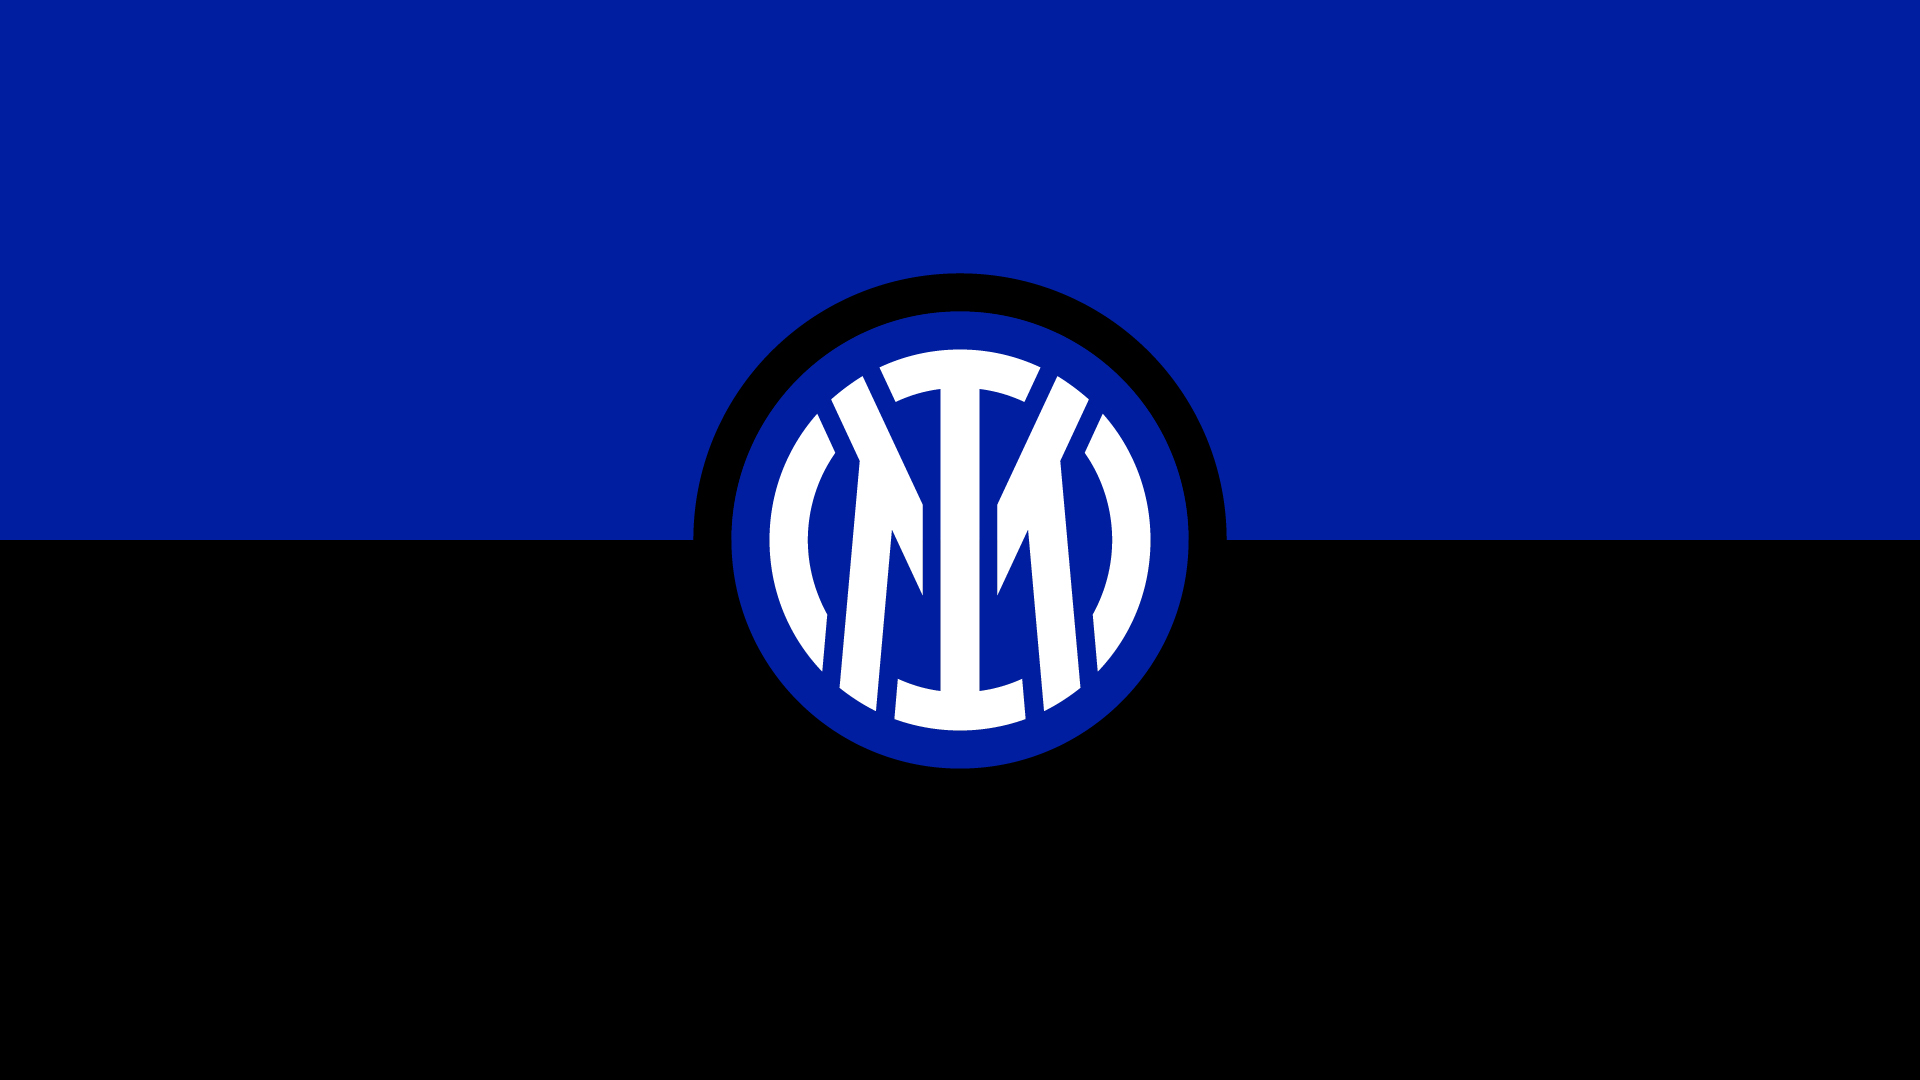 Inter Milan Squad, Players, Stadium, Kits, and much more